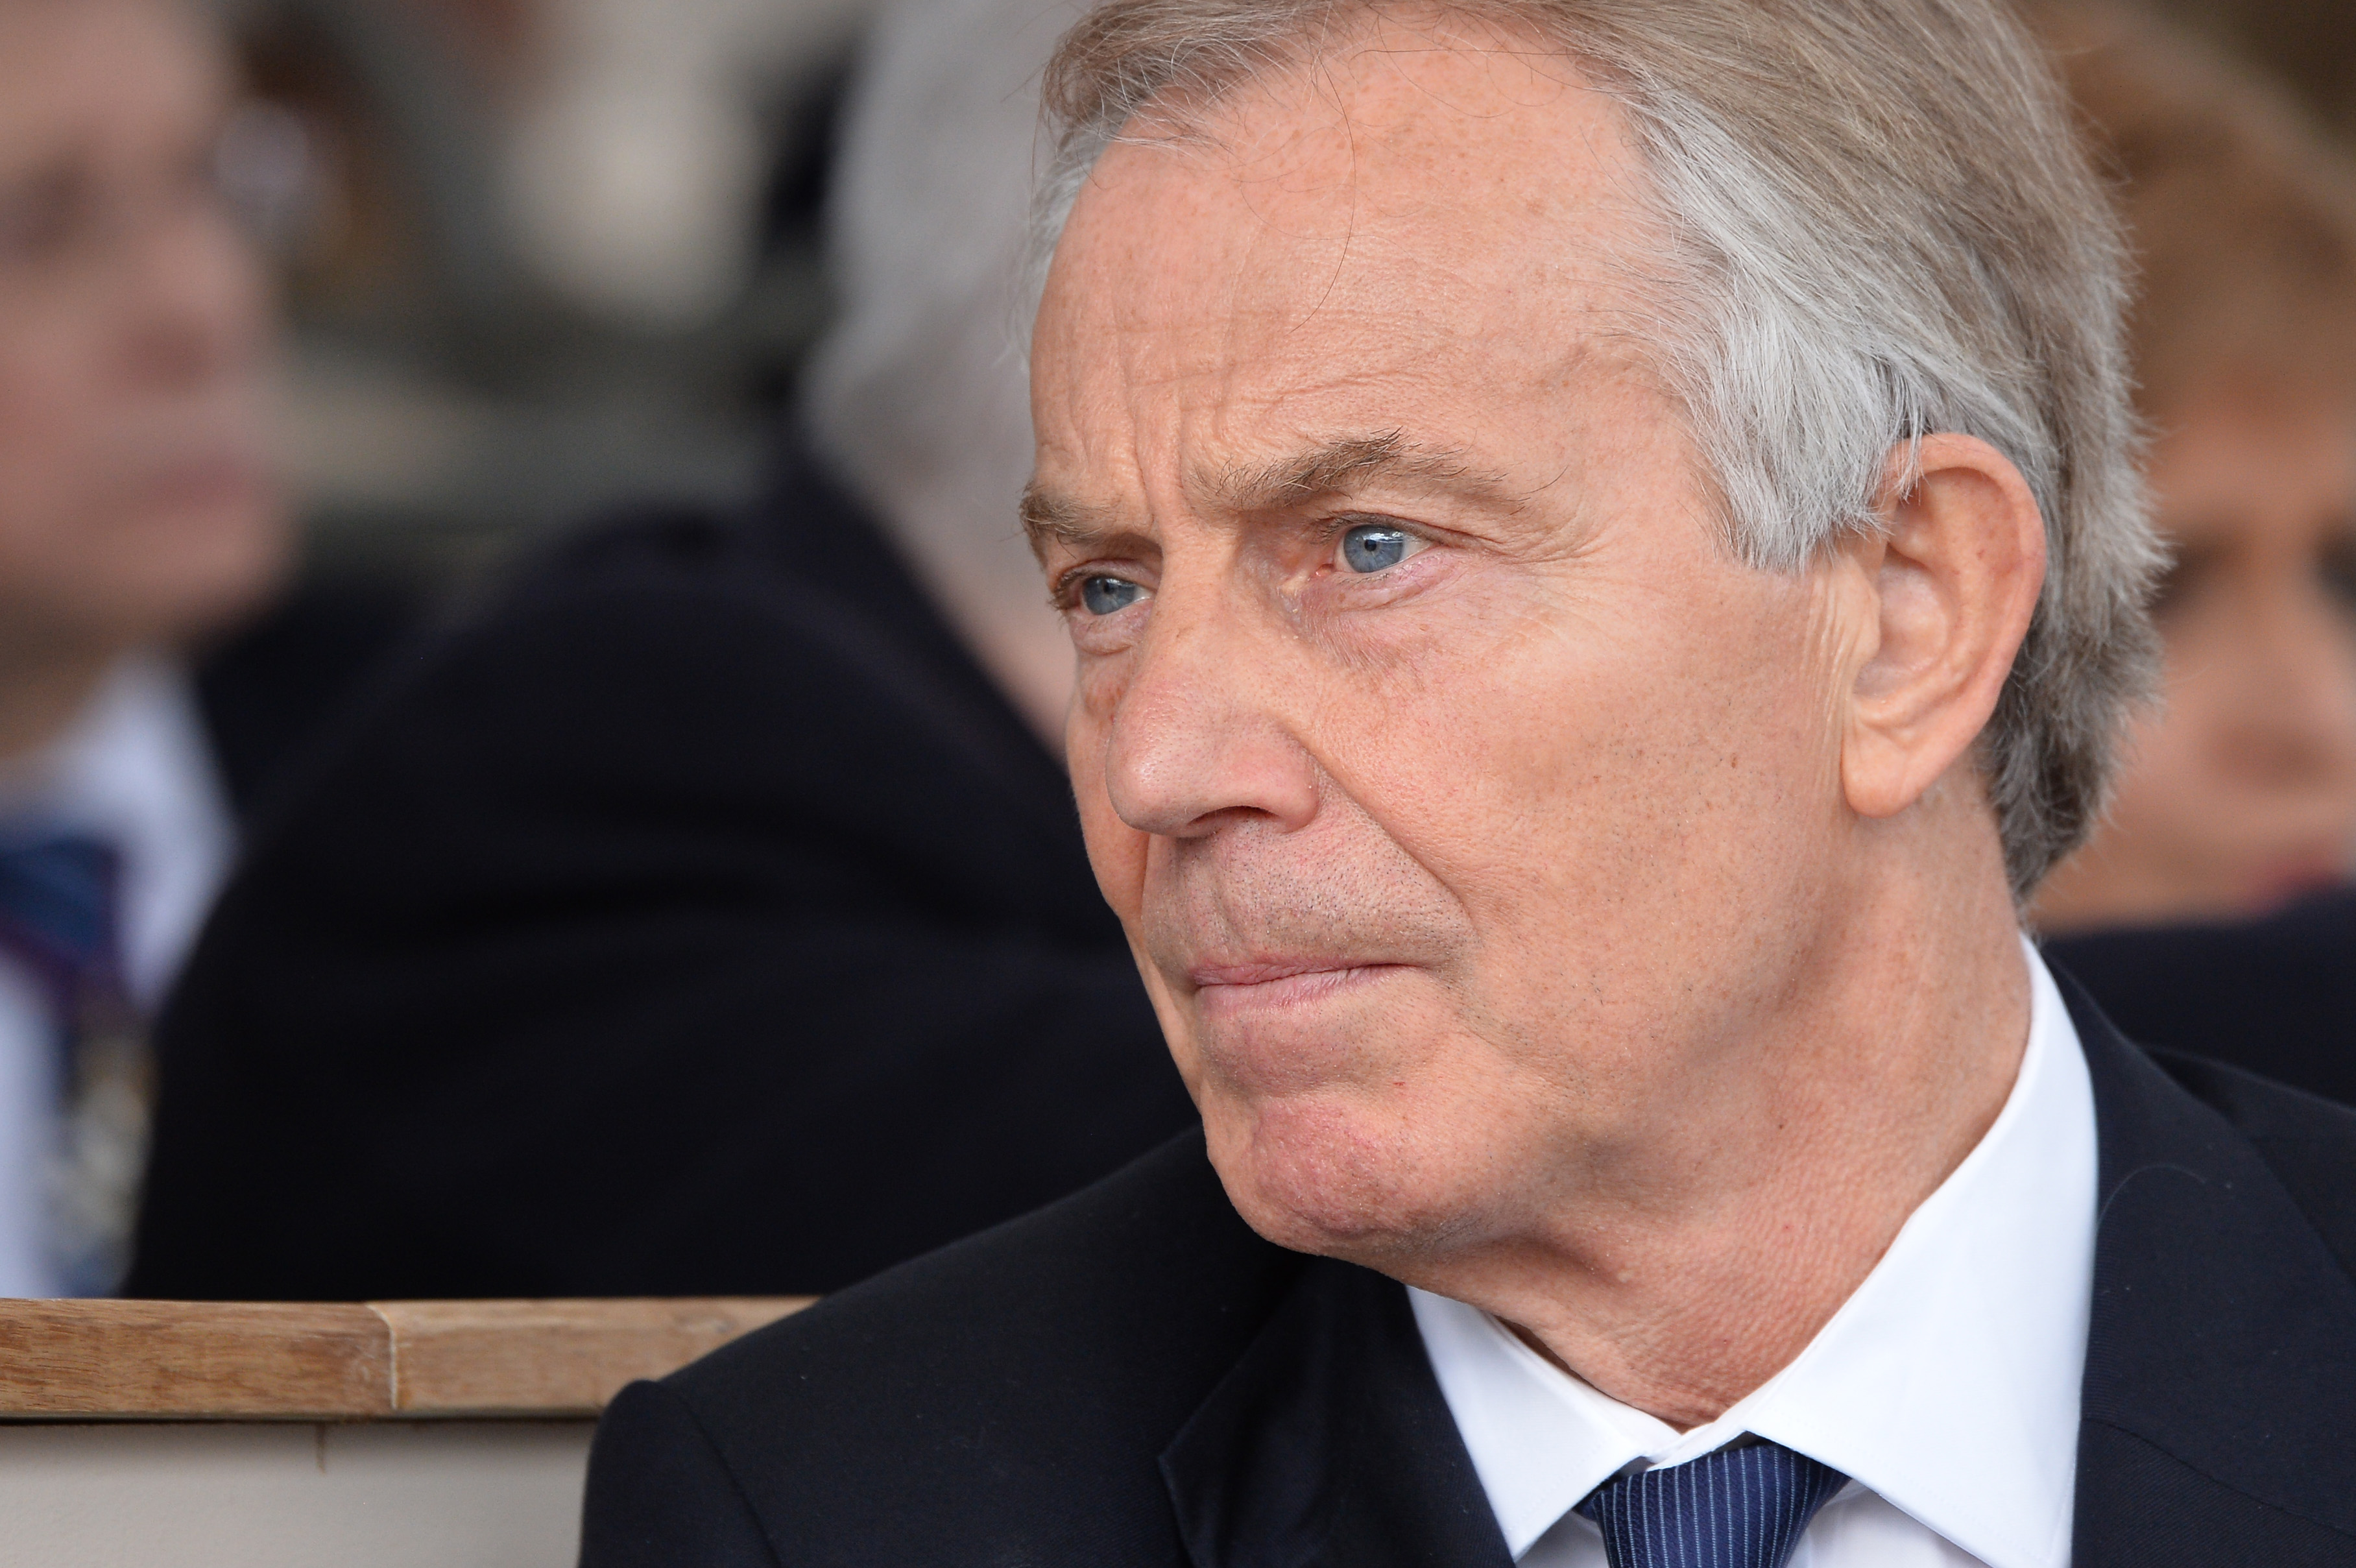 Tony Blair during the dedication and unveiling of The Iraq and Afghanistan memorial on March 9, 2017 in London, England. (Jeff Spicer—Getty Images)